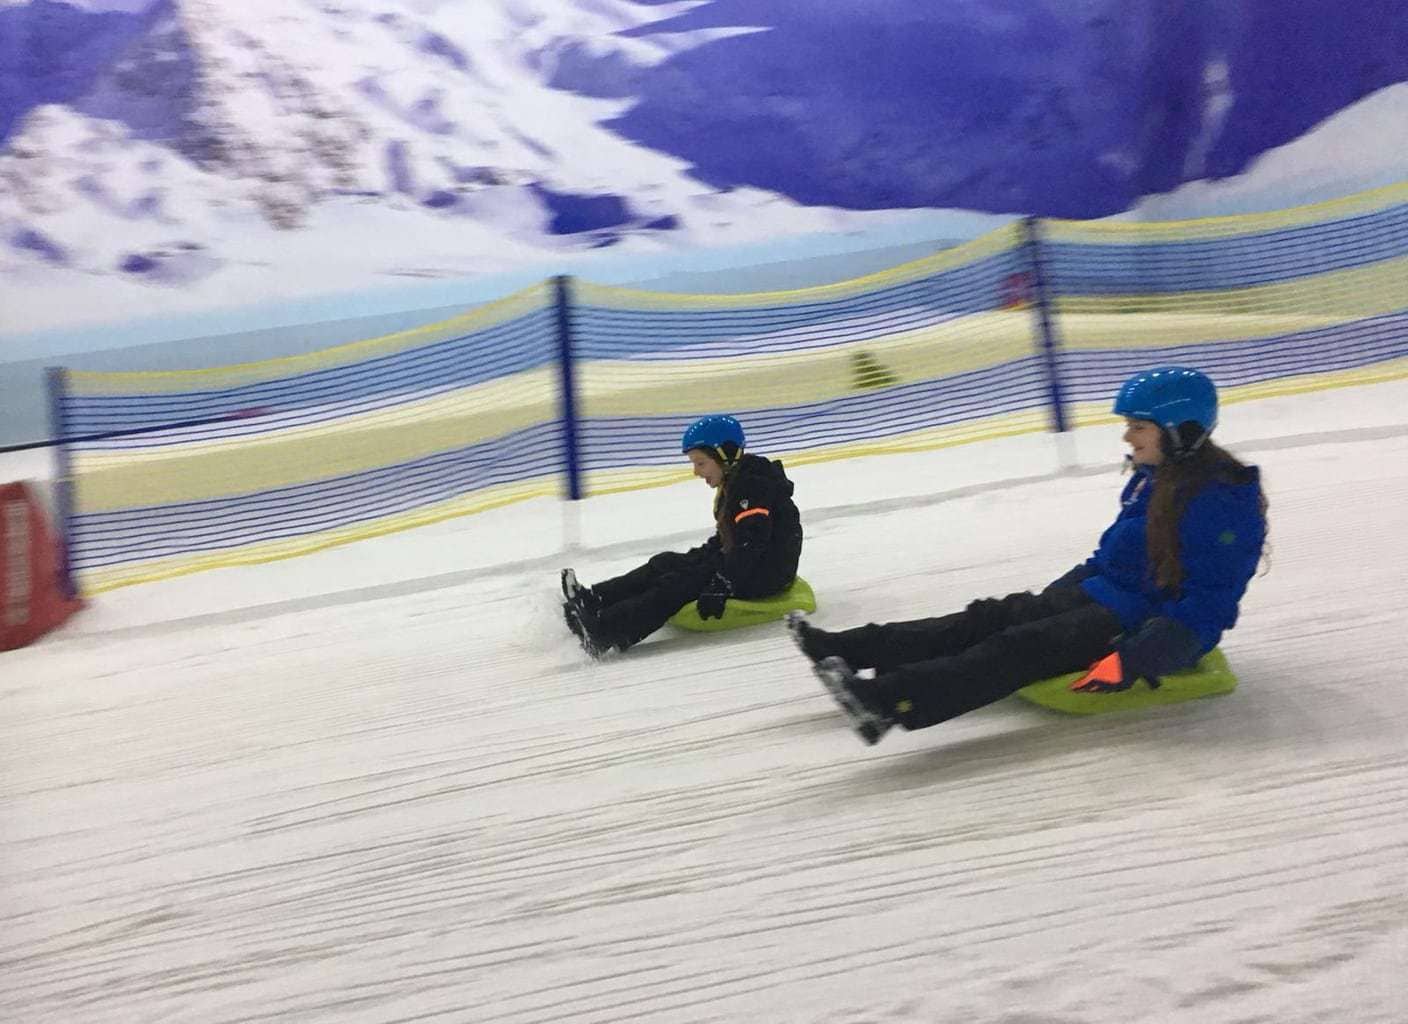 Re-launched Snow Park at Manchester’s Chill Factore